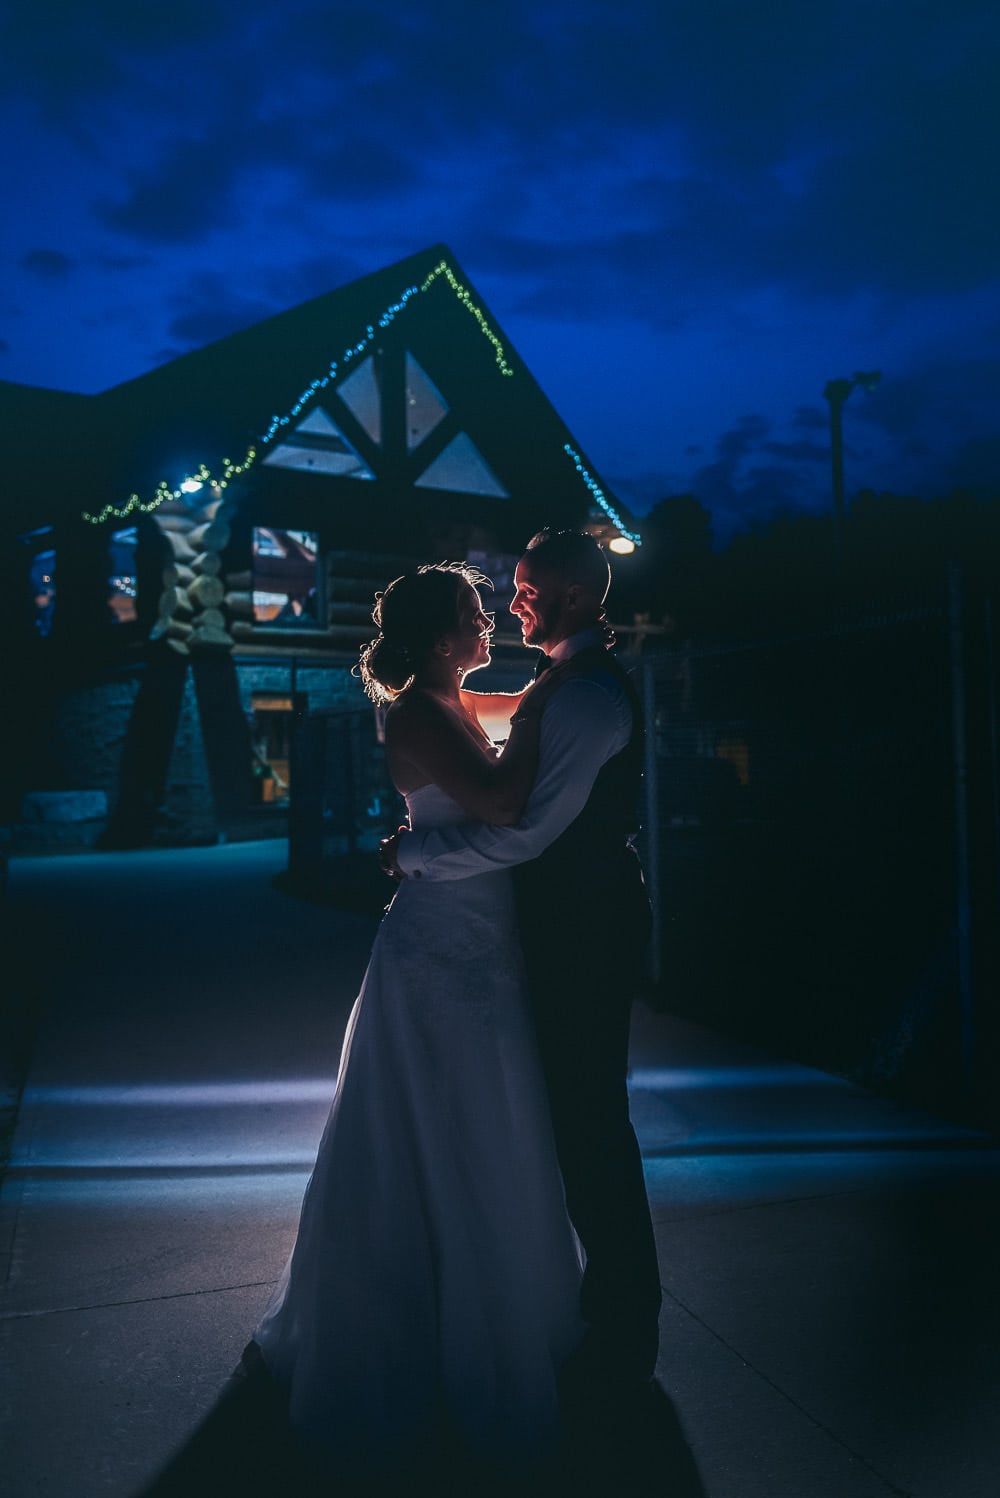 Night time wedding photo at Pine Valley Chalet